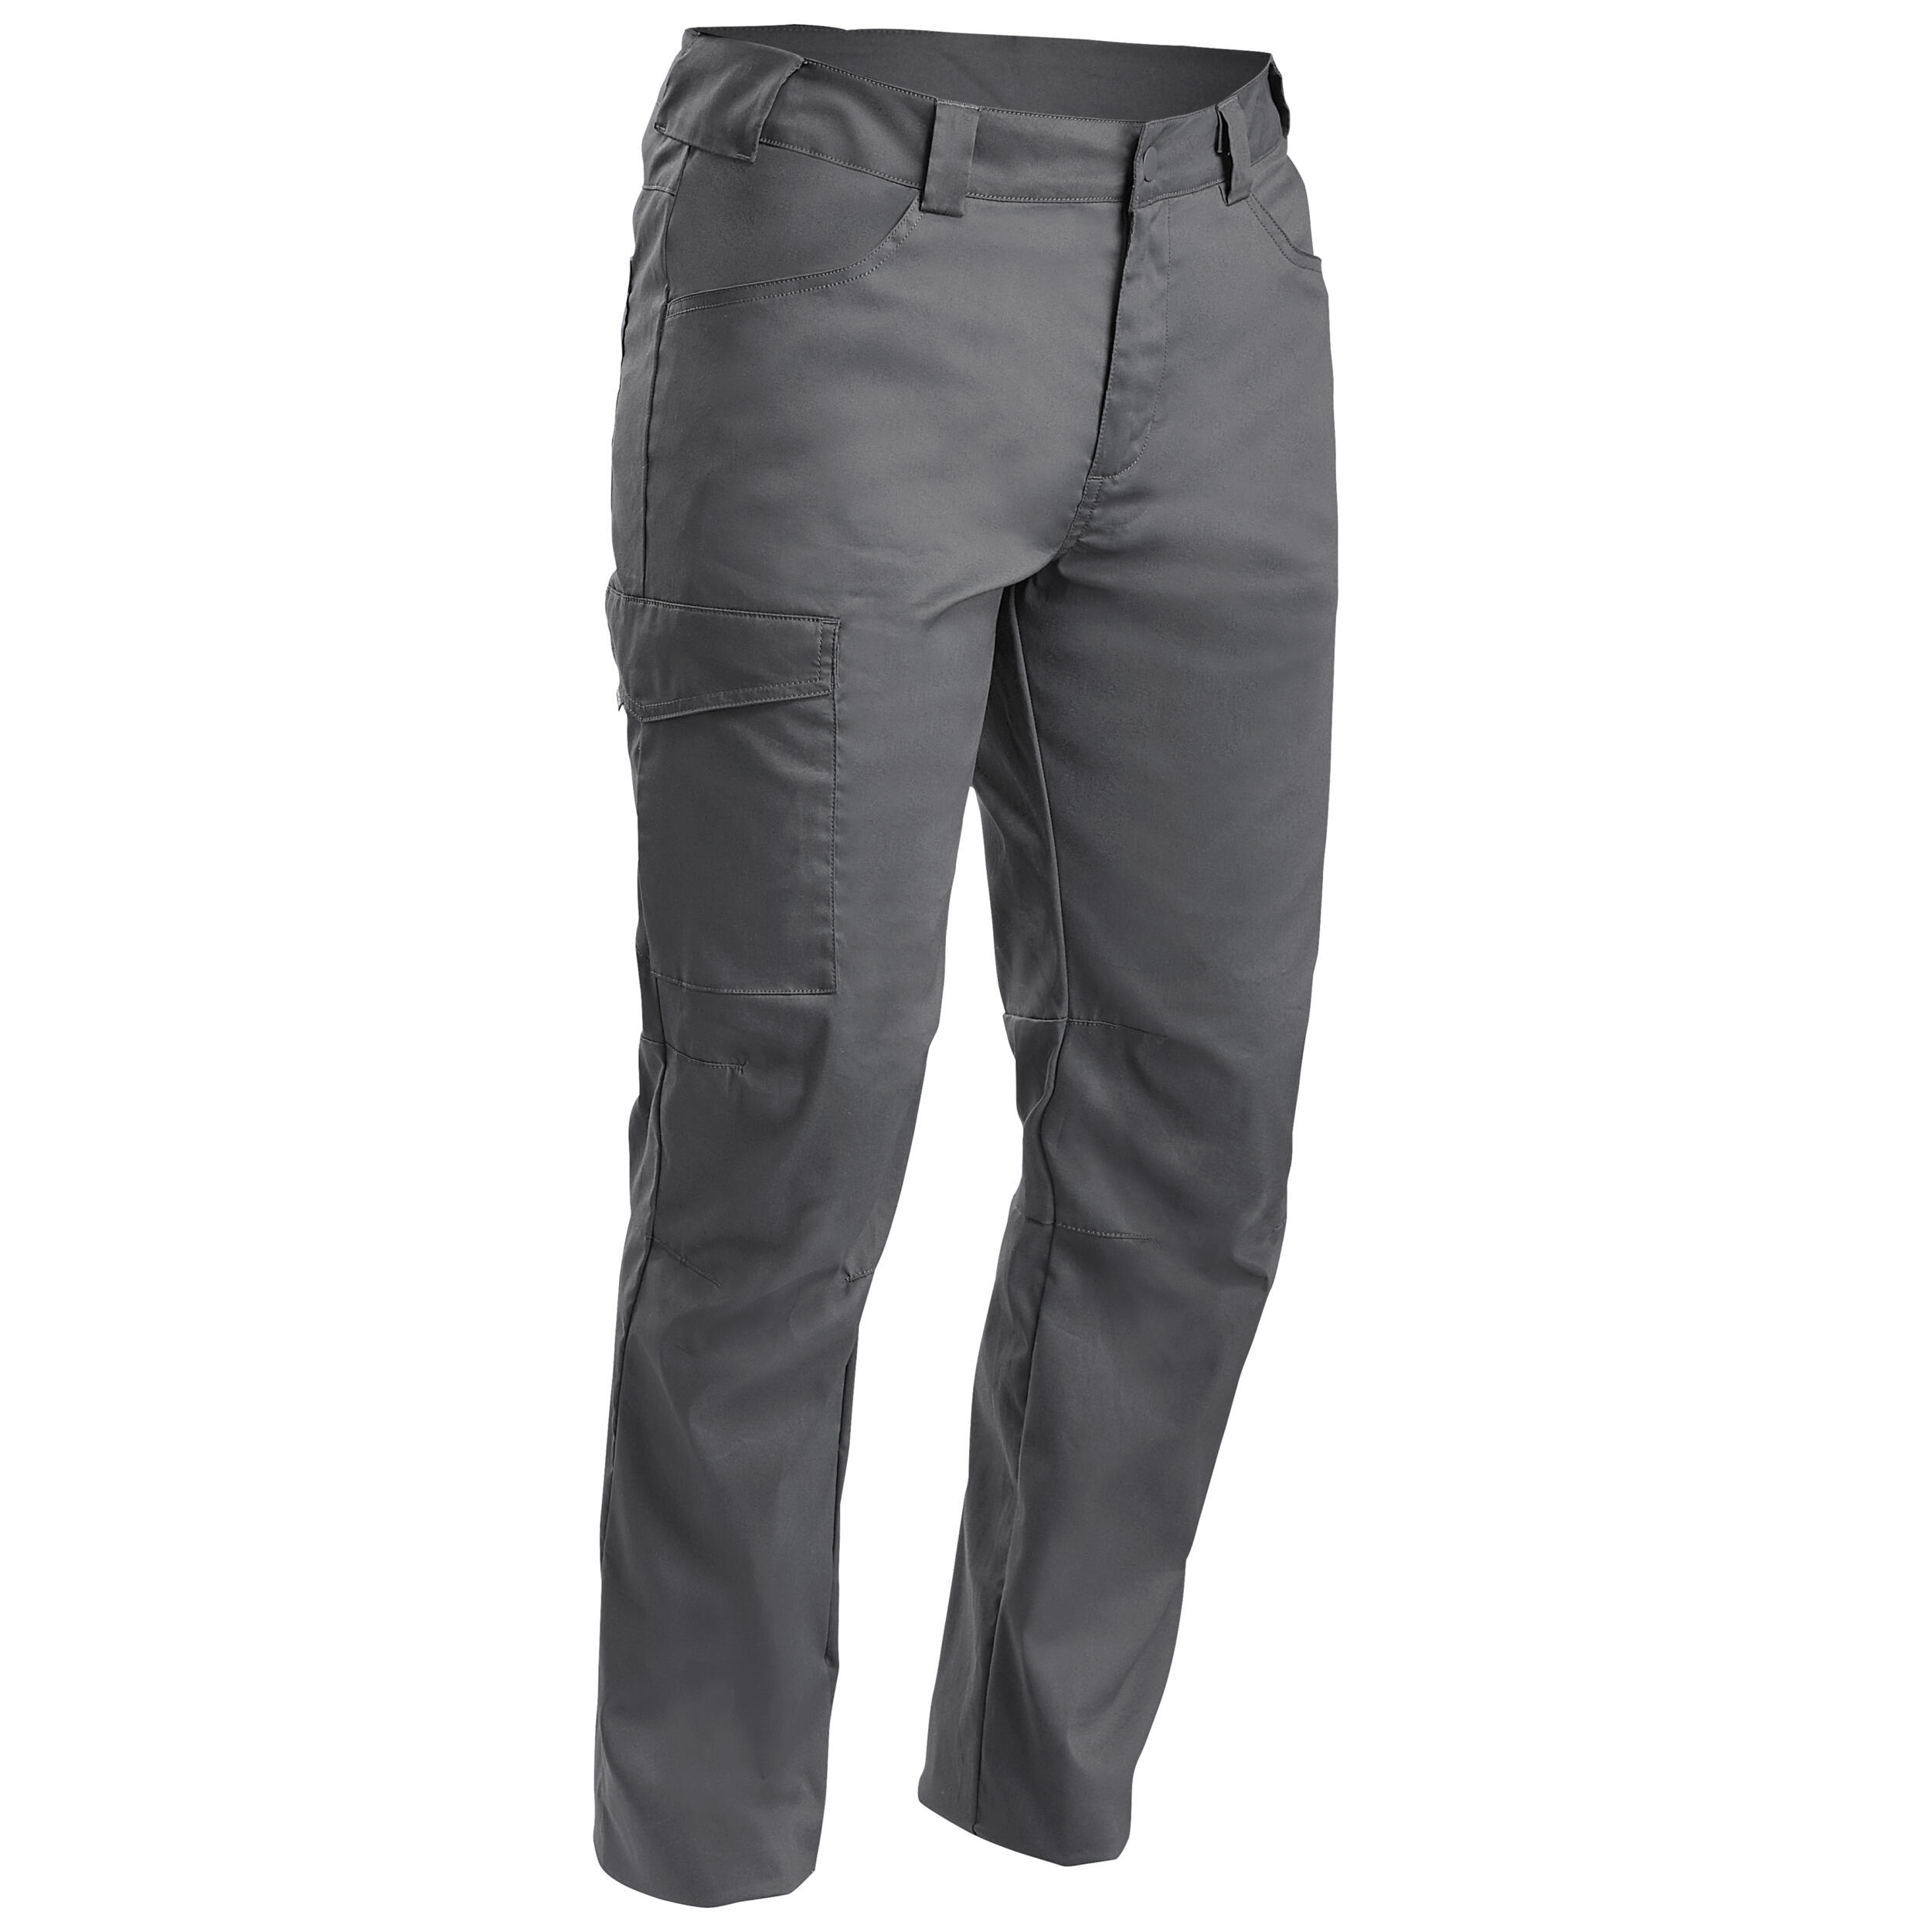 Share more than 175 decathlon walking trousers latest